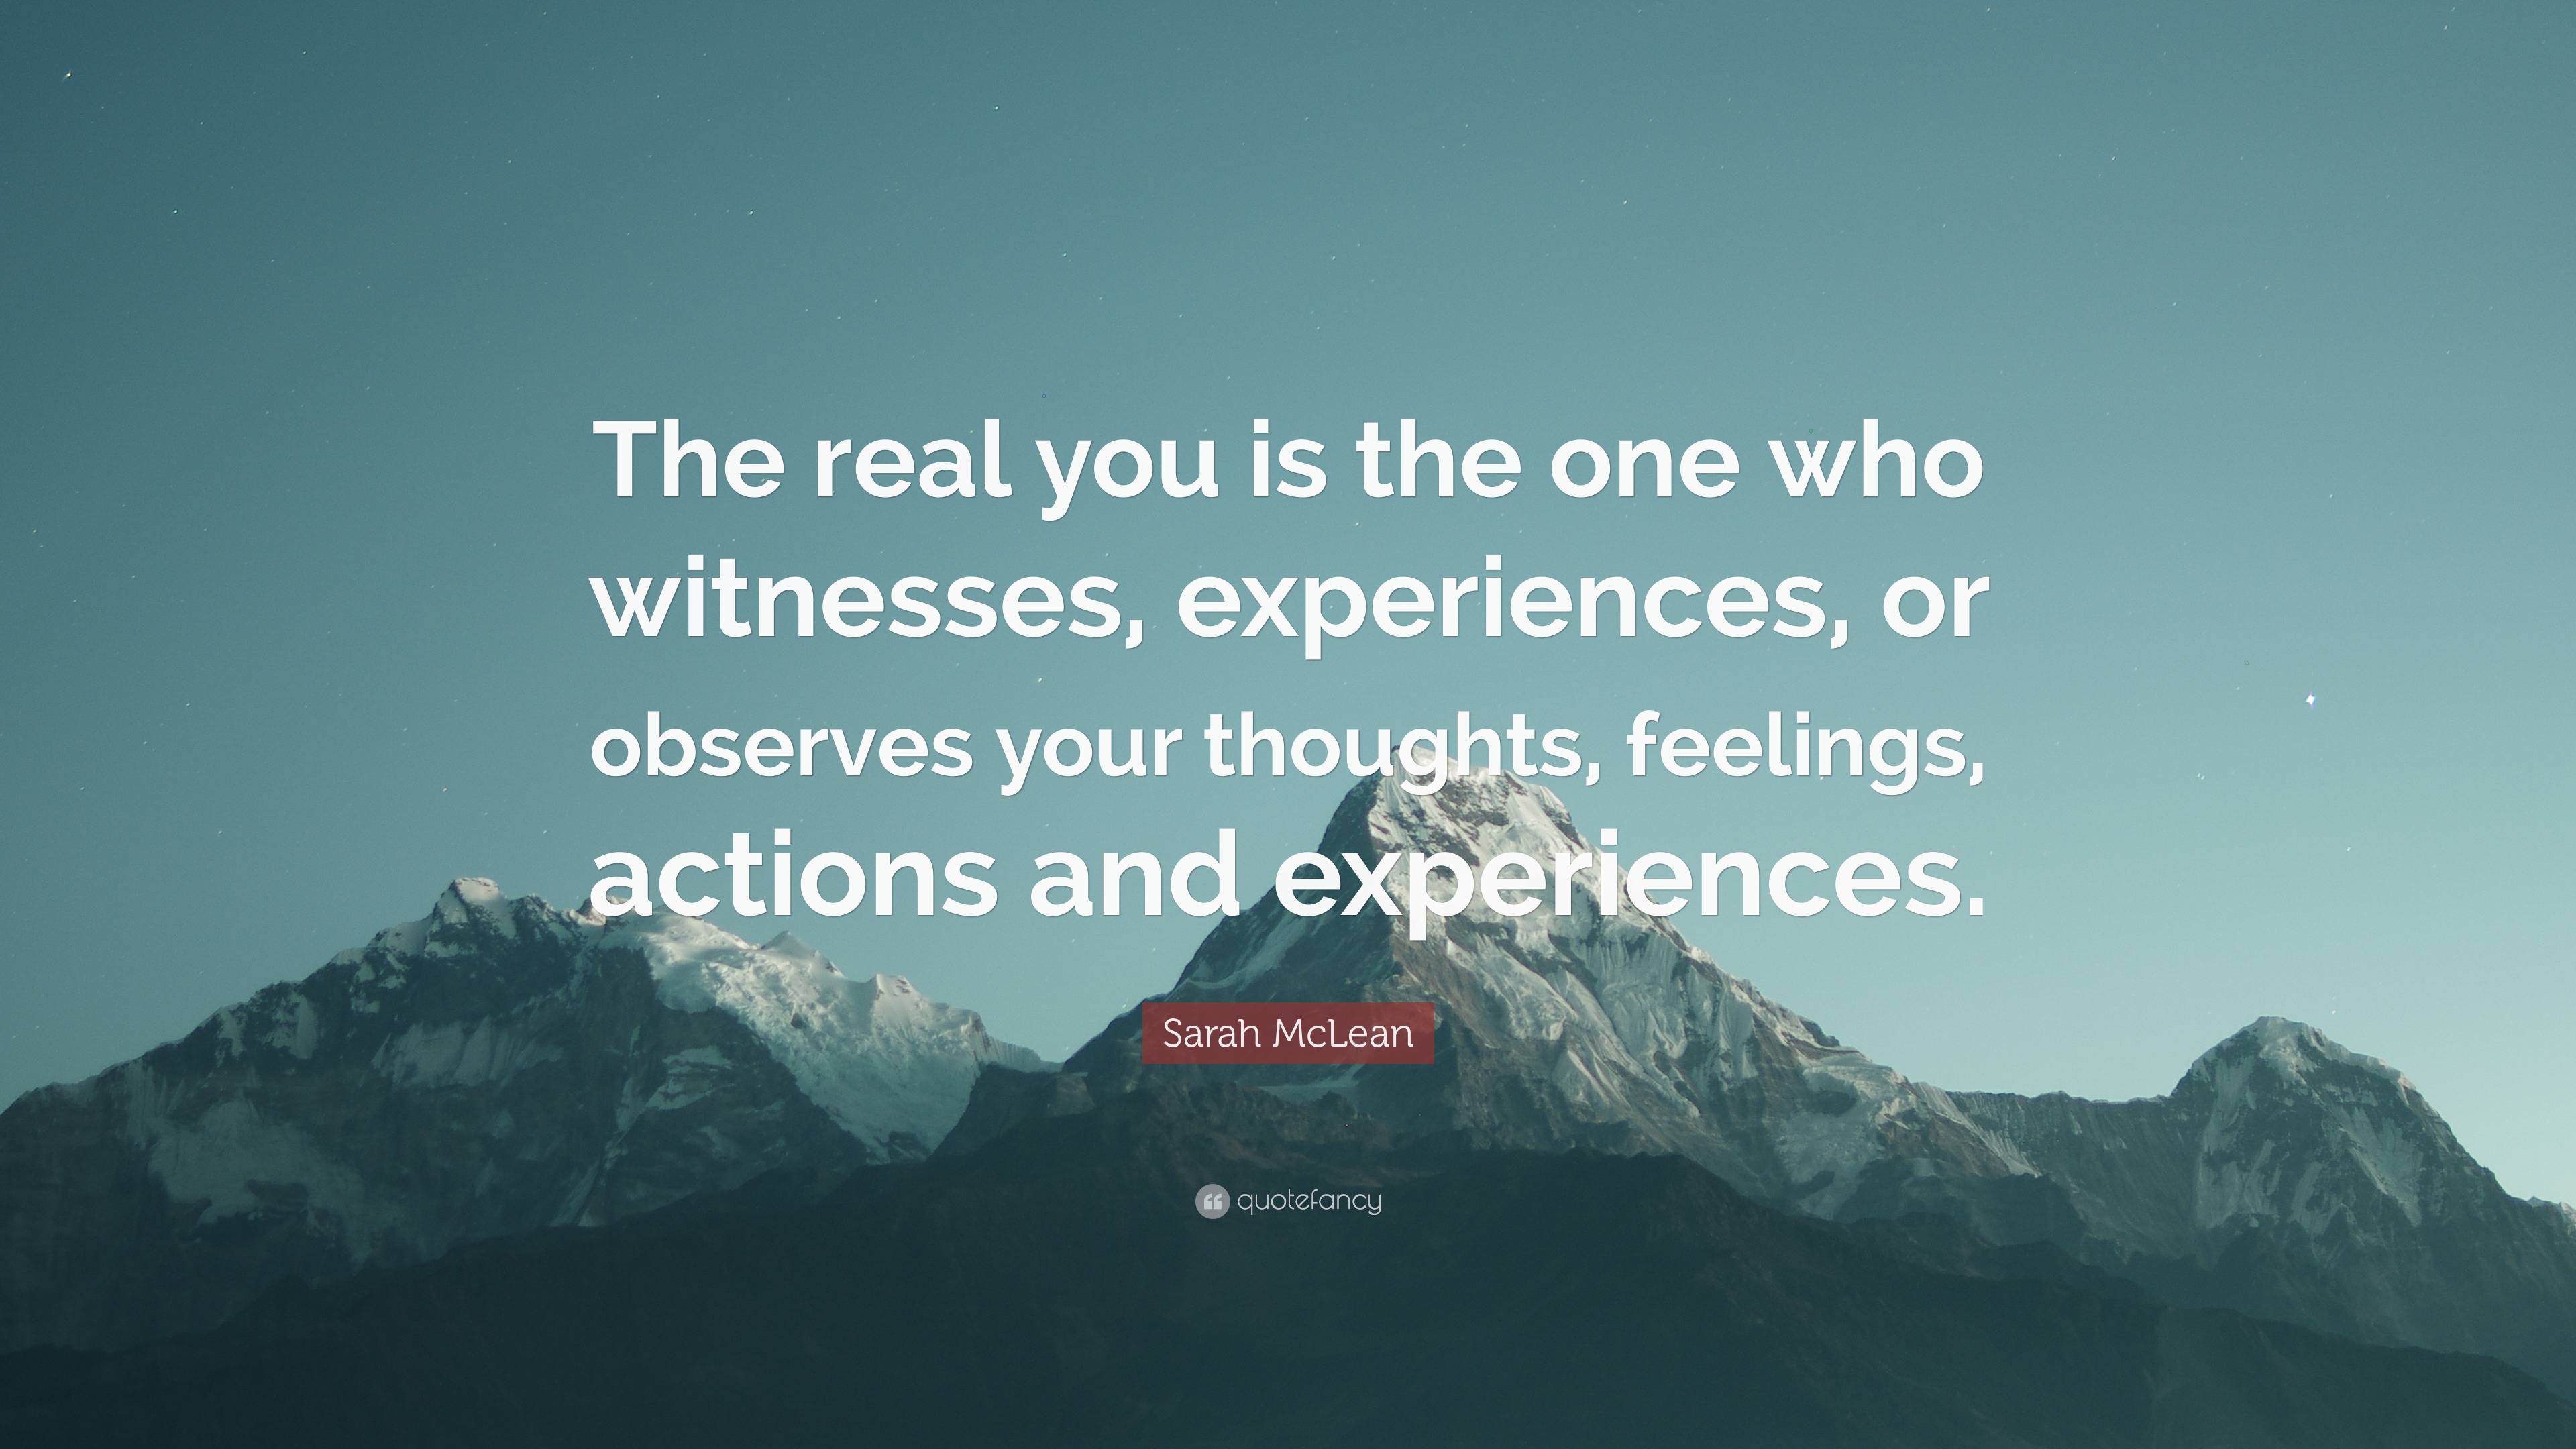 Sarah McLean Quote: “The real you is the one who witnesses, experiences ...